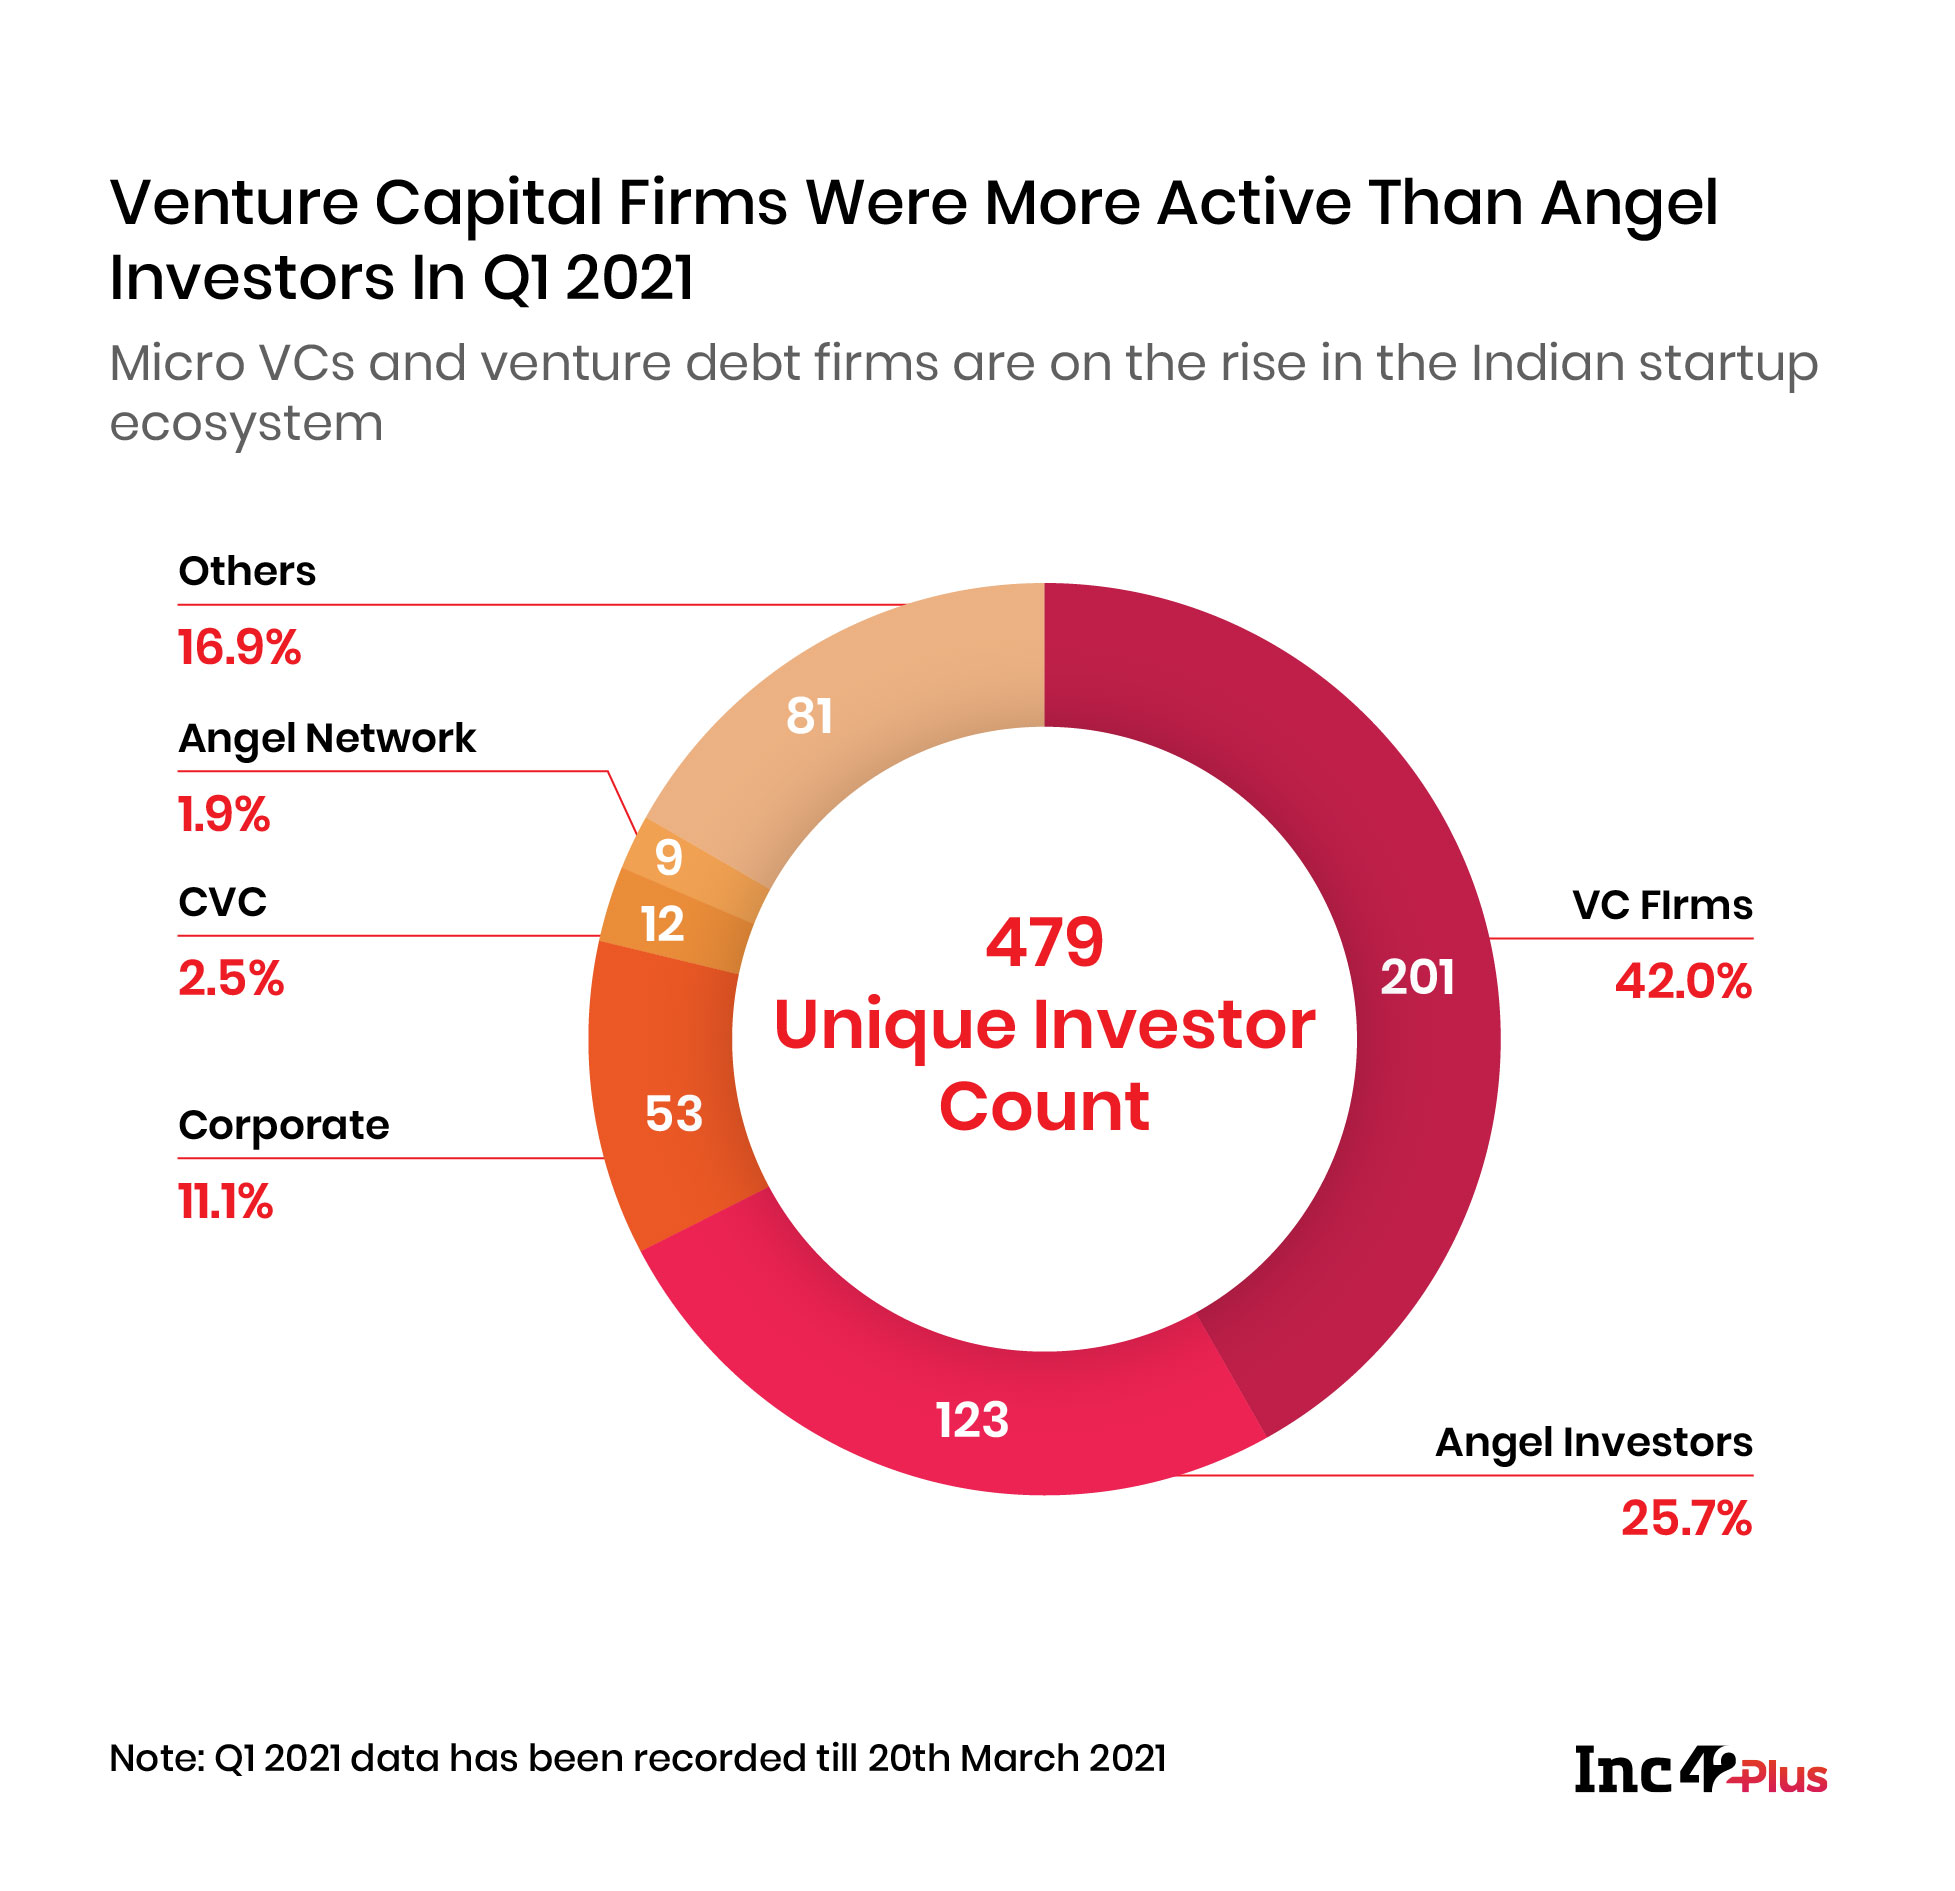 Venture Capital Firms Were More Active Than Angel Investors In Q1 2021